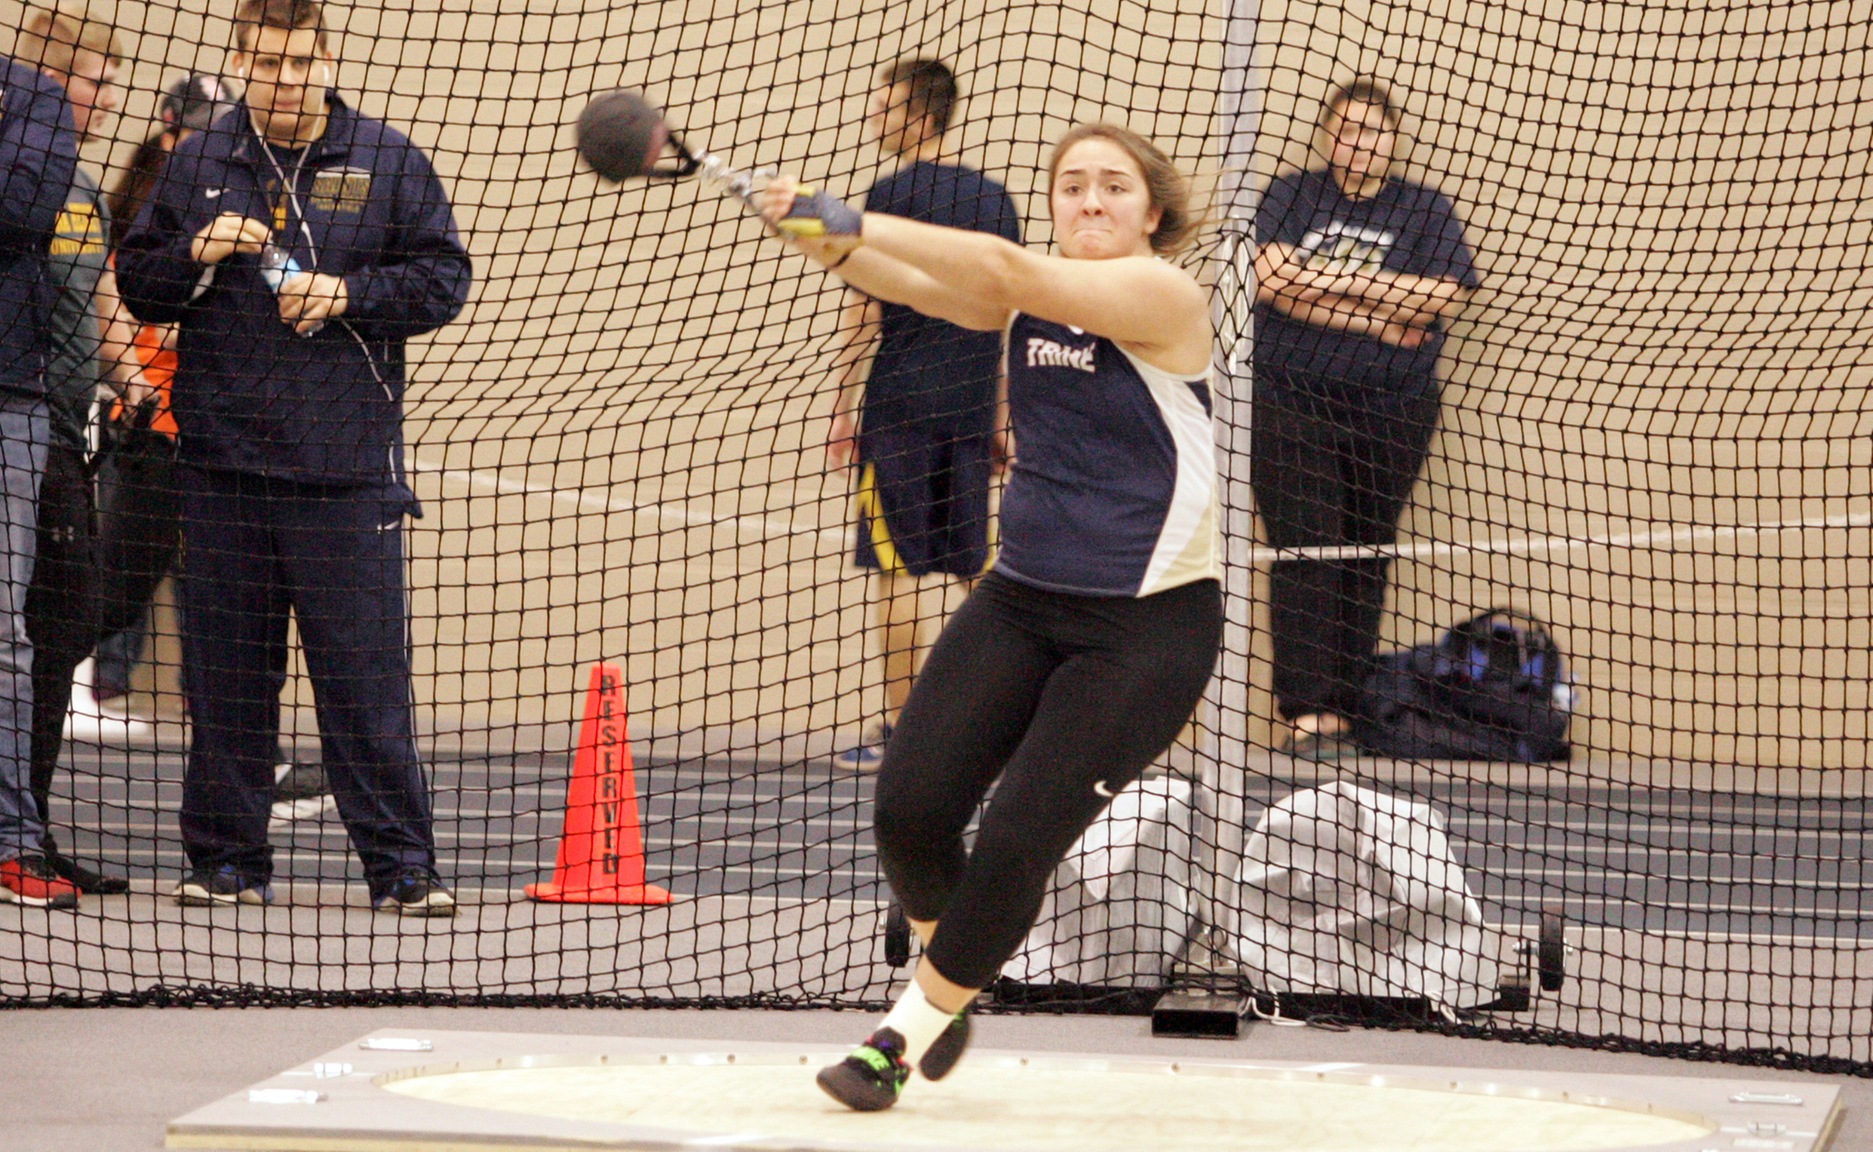 Throwers Have Successful Day at Hillsdale